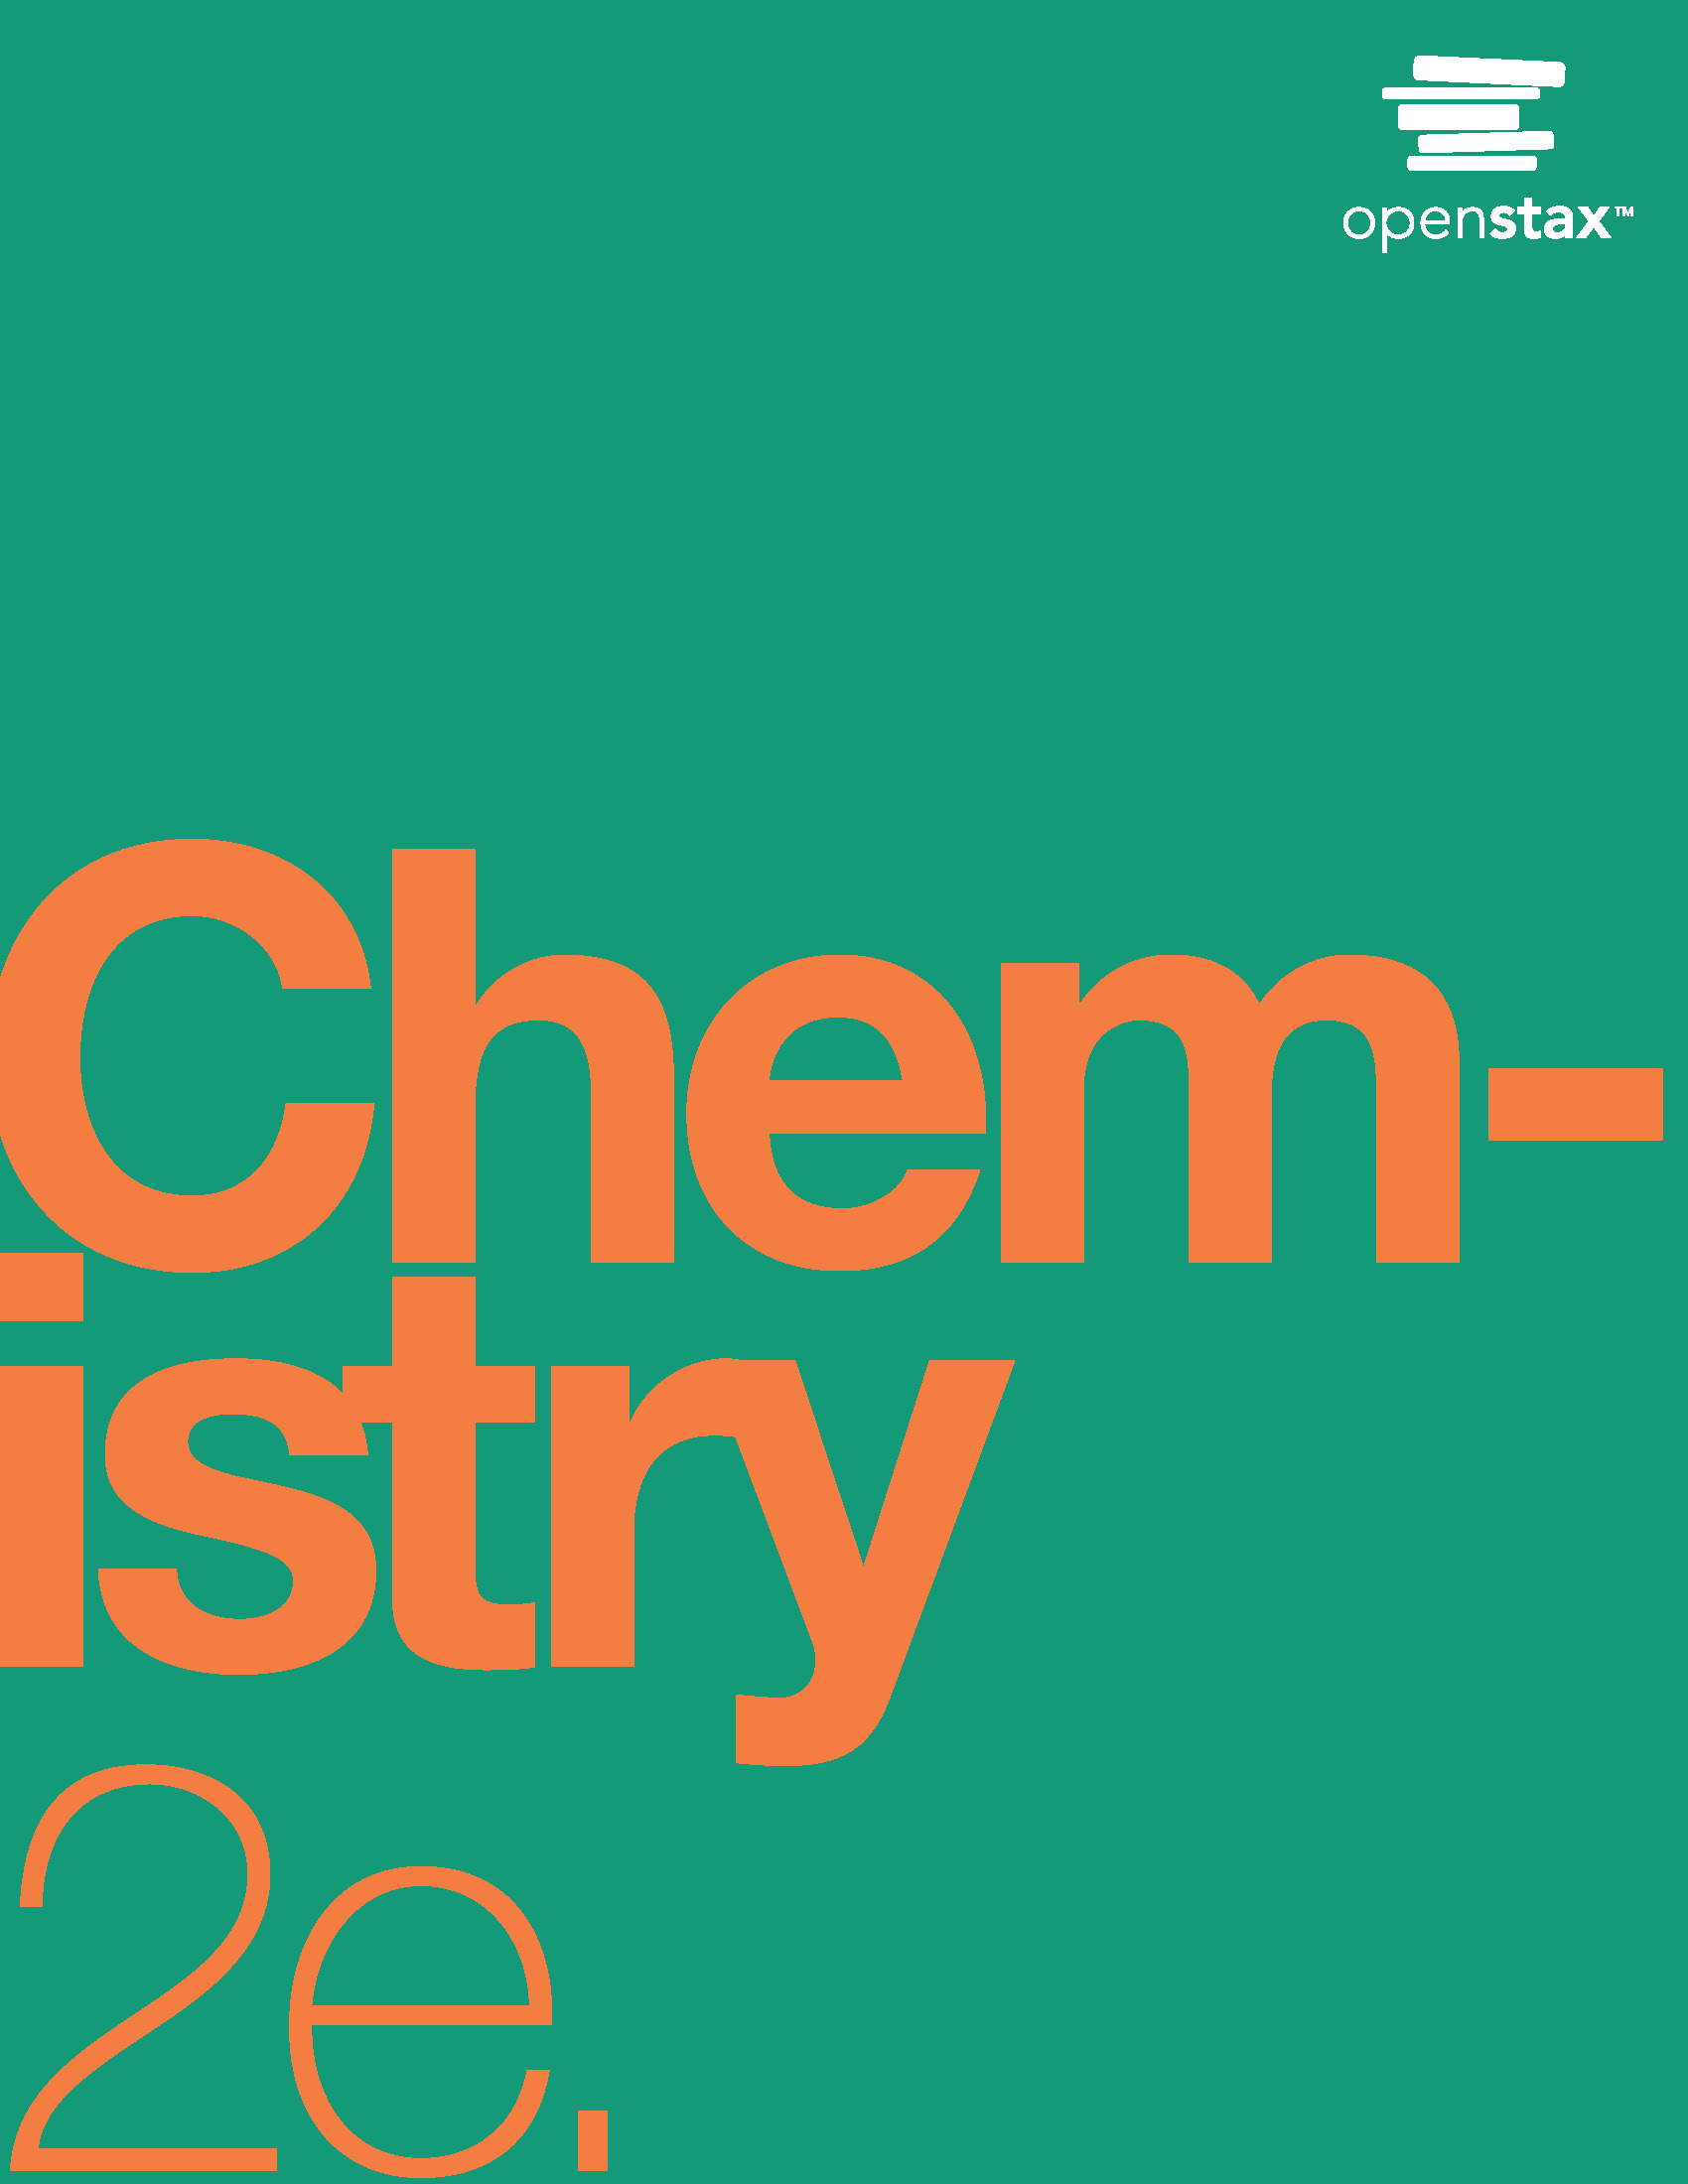 Cover image for Chemistry 112 (Chapters 12-17 of OpenStax General Chemistry)